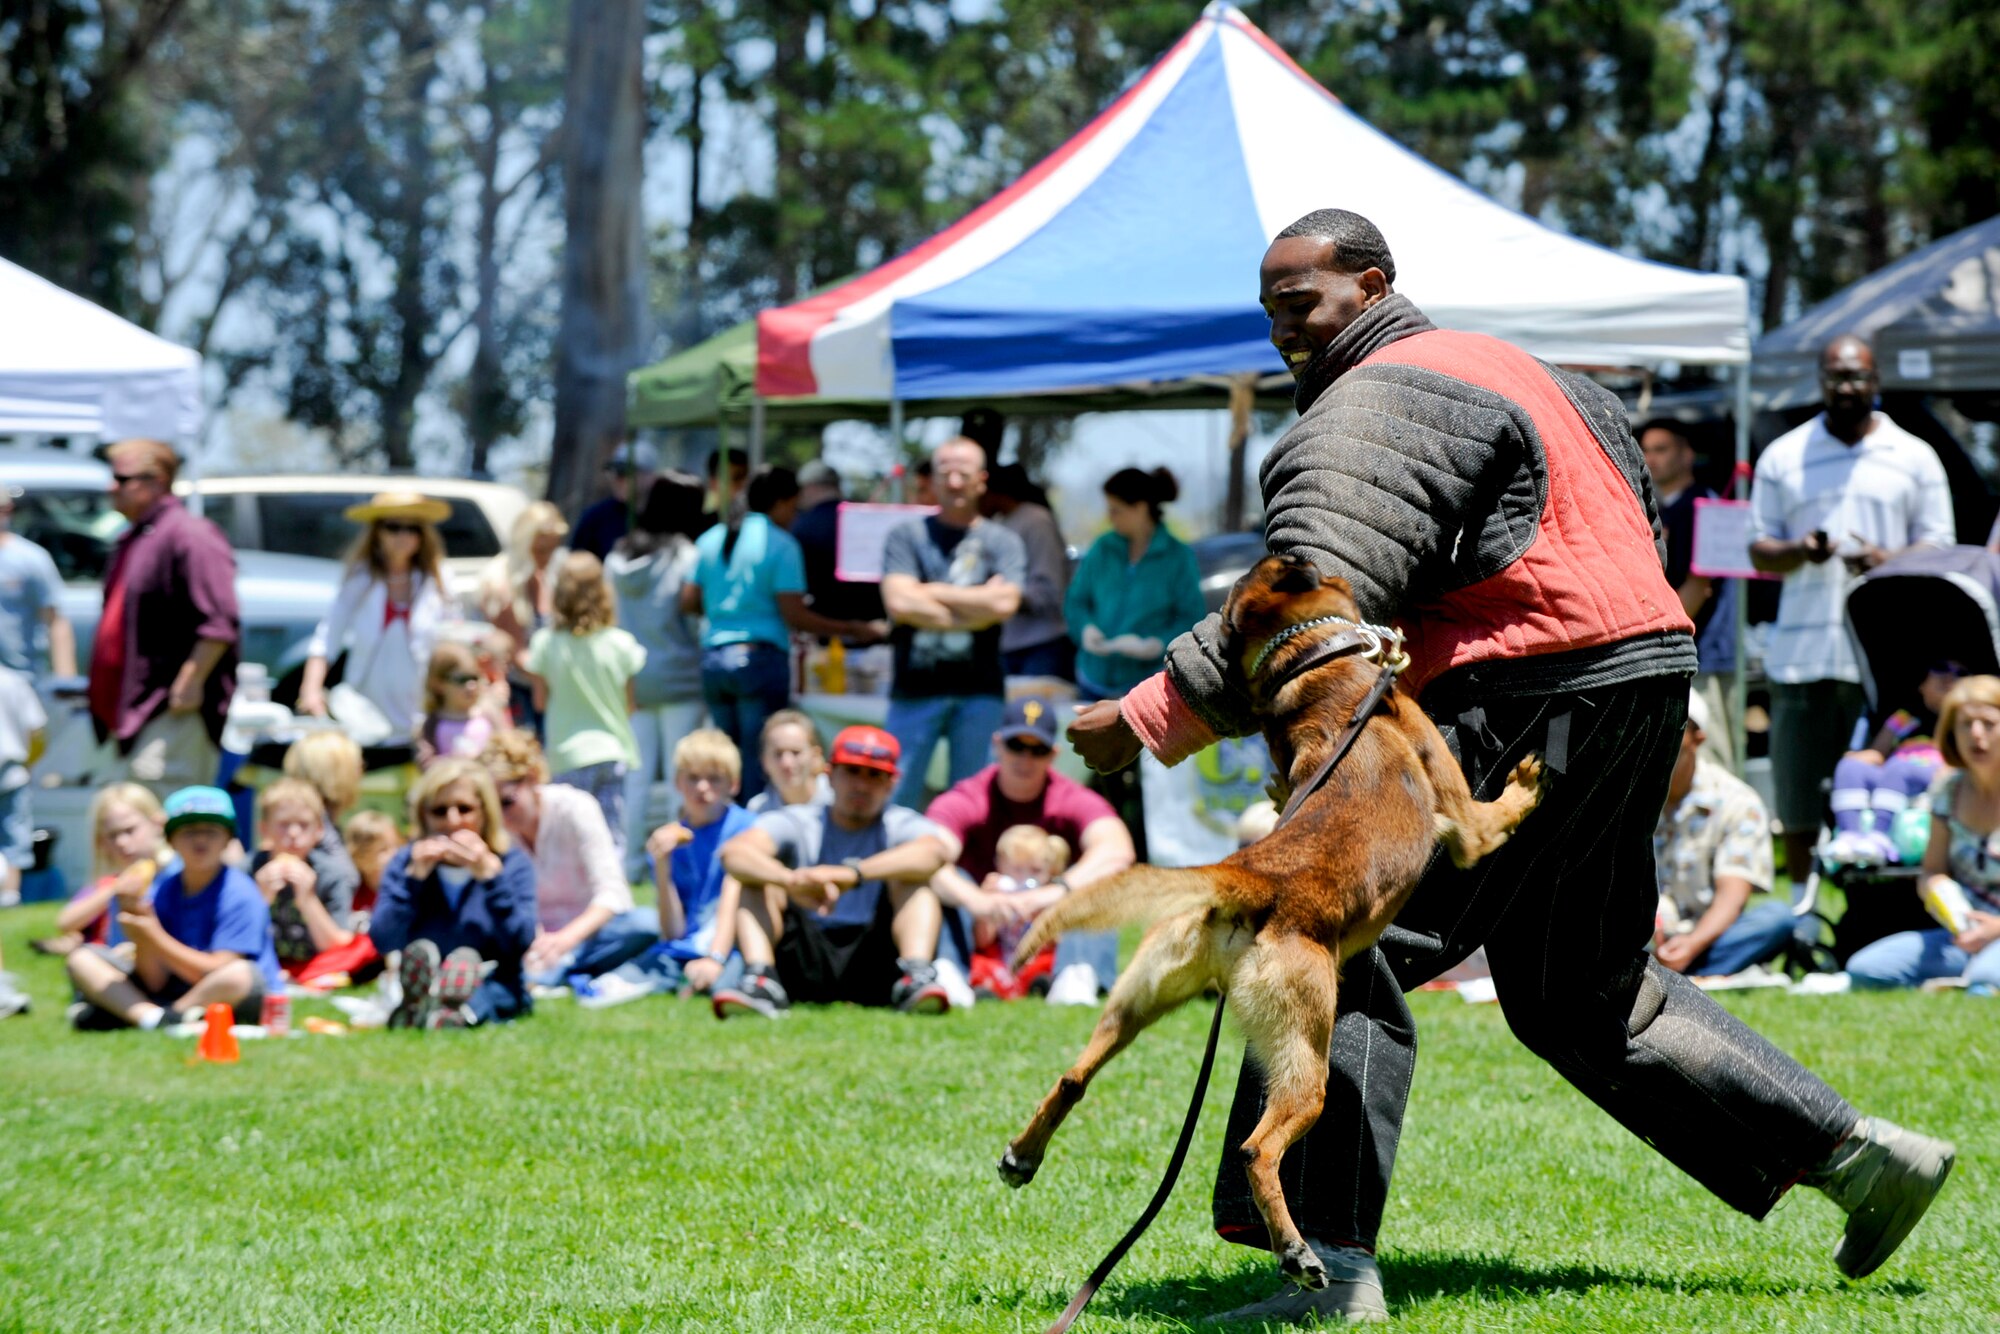 VANDENBERG AIR FORCE BASE, Calif. -- Staff Sgt. Henry Edwards III, a 30th Security Forces Squadron dog handler, demonstrates how military working dogs subdue individuals during Vandenberg's Independence Day celebration here July 7, 2012. More than 1200 Team V members came to base to celebrate their nations independence. (U.S. Air Force photo/Staff Sgt. Levi Riendeau)
